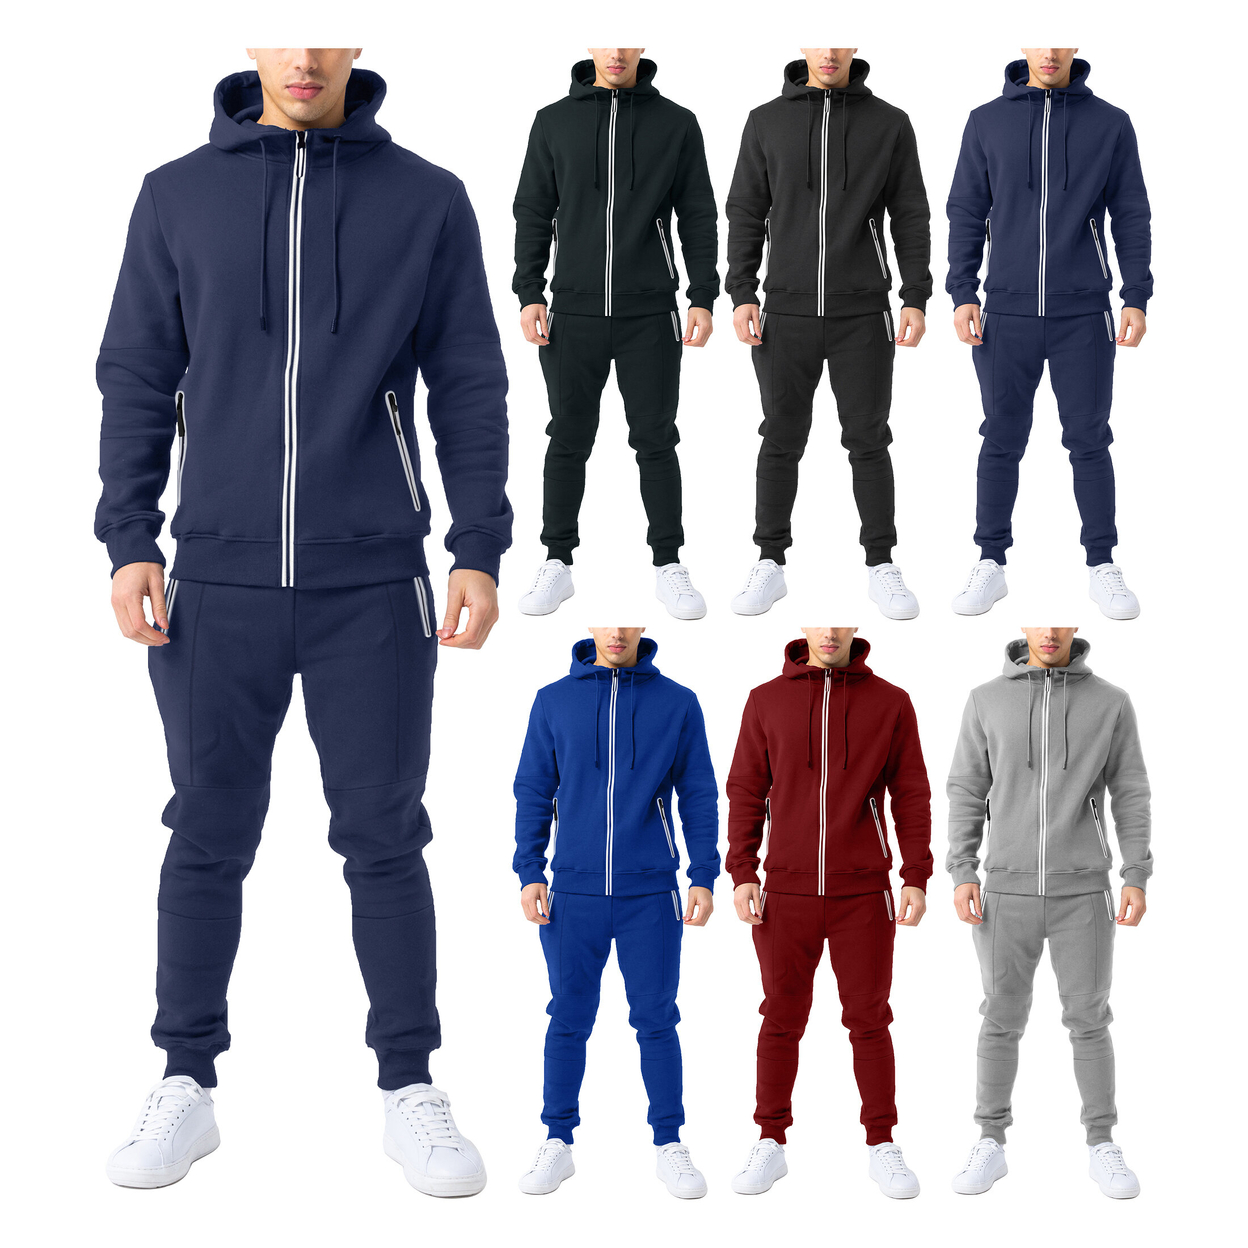 2-Pack: Men's Cozy Slim Fit Active Athletic Full Zip Hoodie And Jogger Tracksuit - Black & Blue, Small